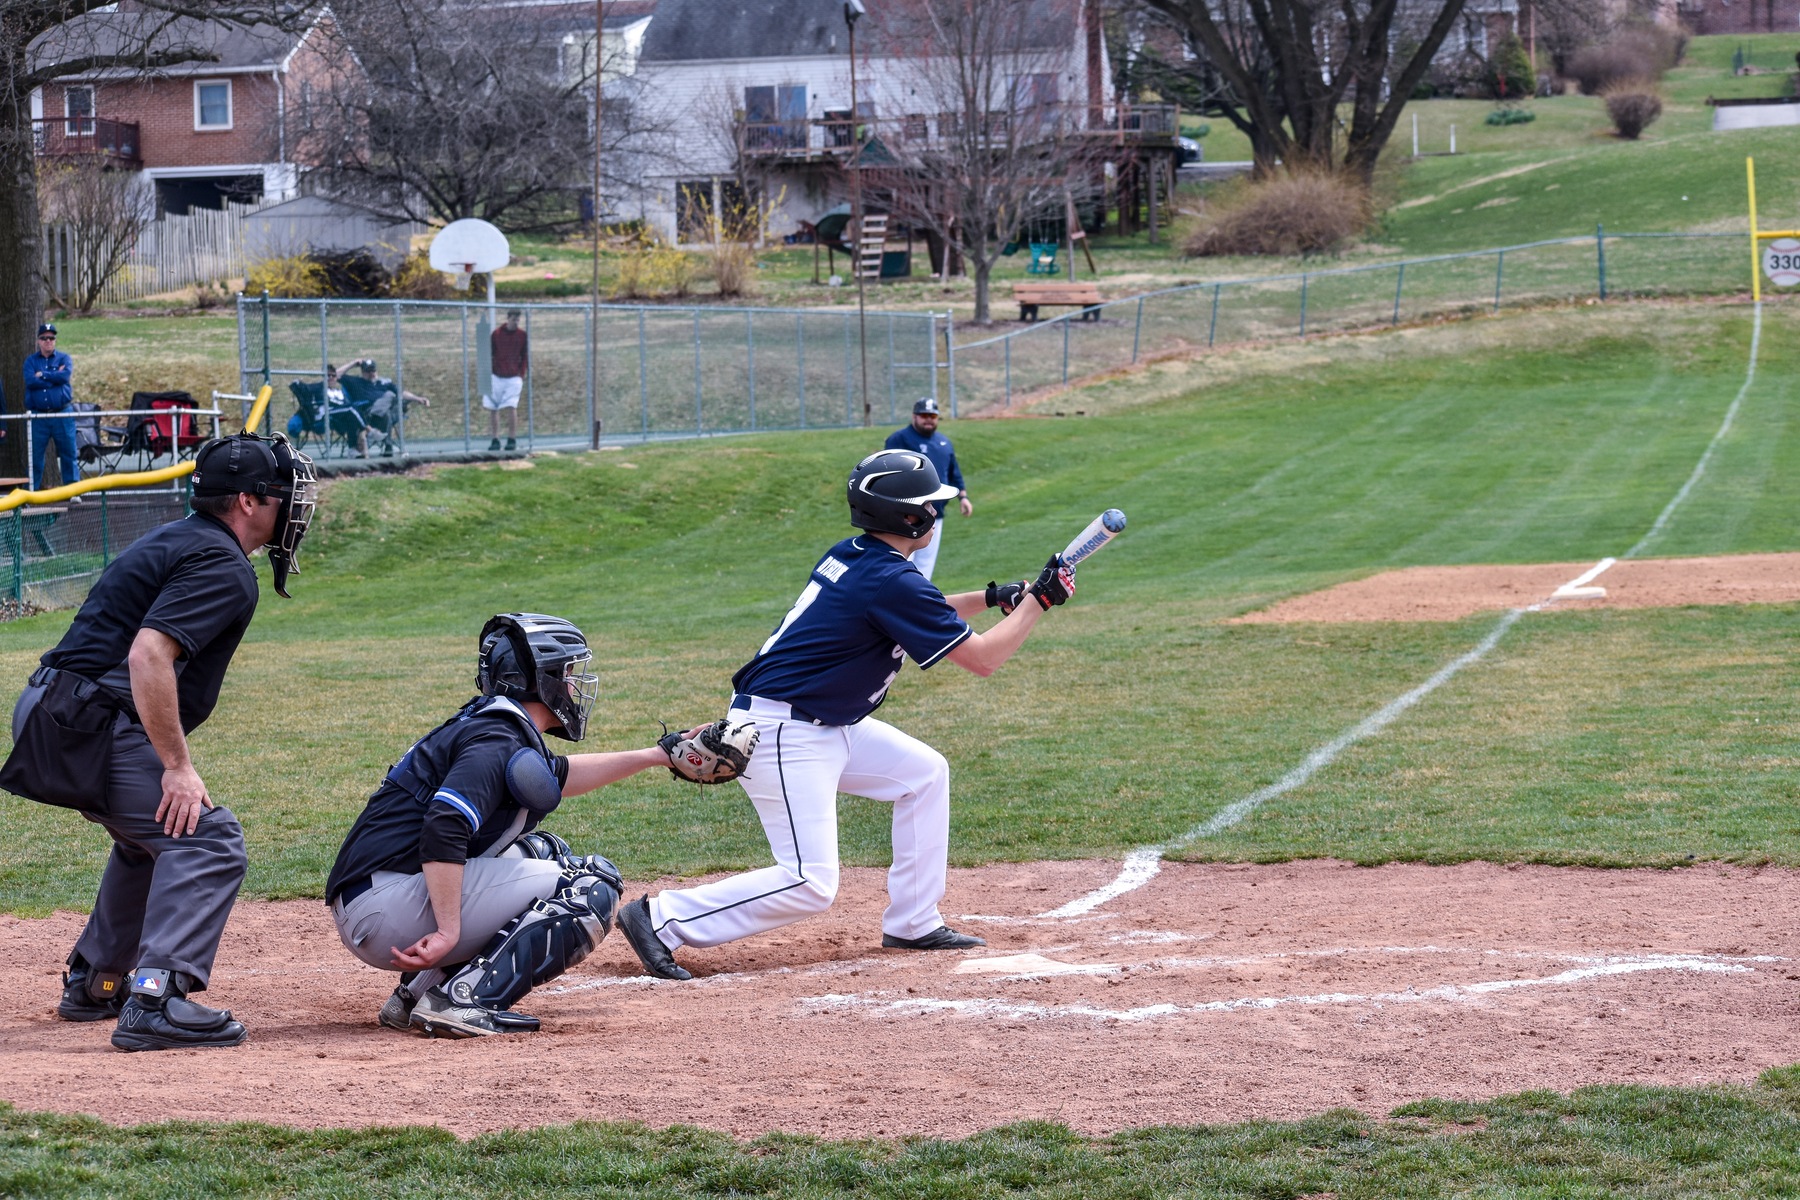 John "JP" Dyson recorded two hits, three walks, and two steals for Penn State York in the victory.